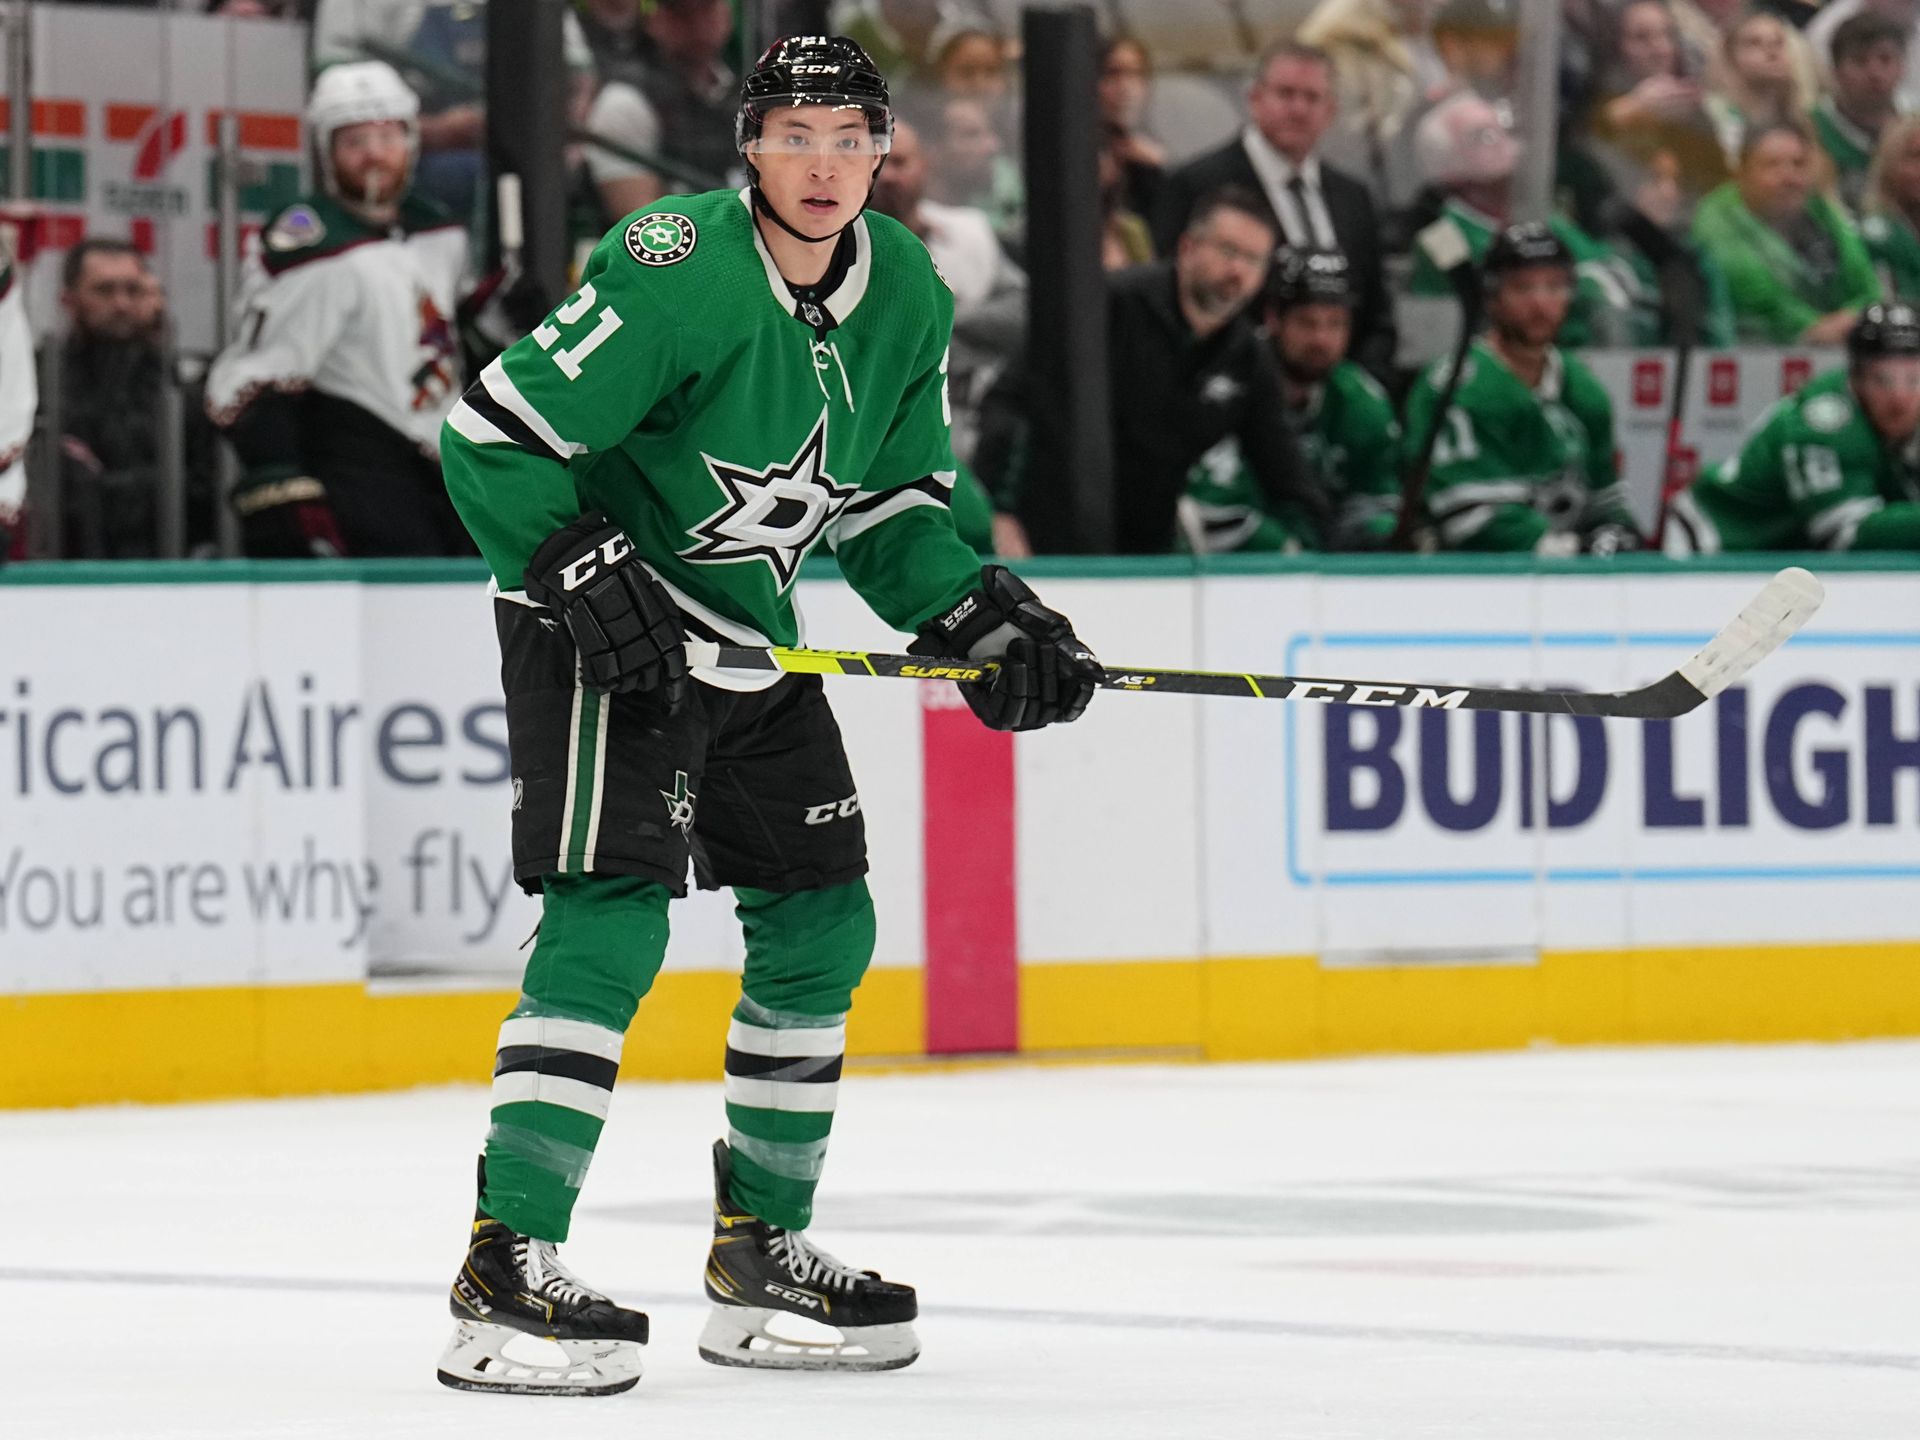 Dallas Stars fan guide: Everything you need to know for playoffs